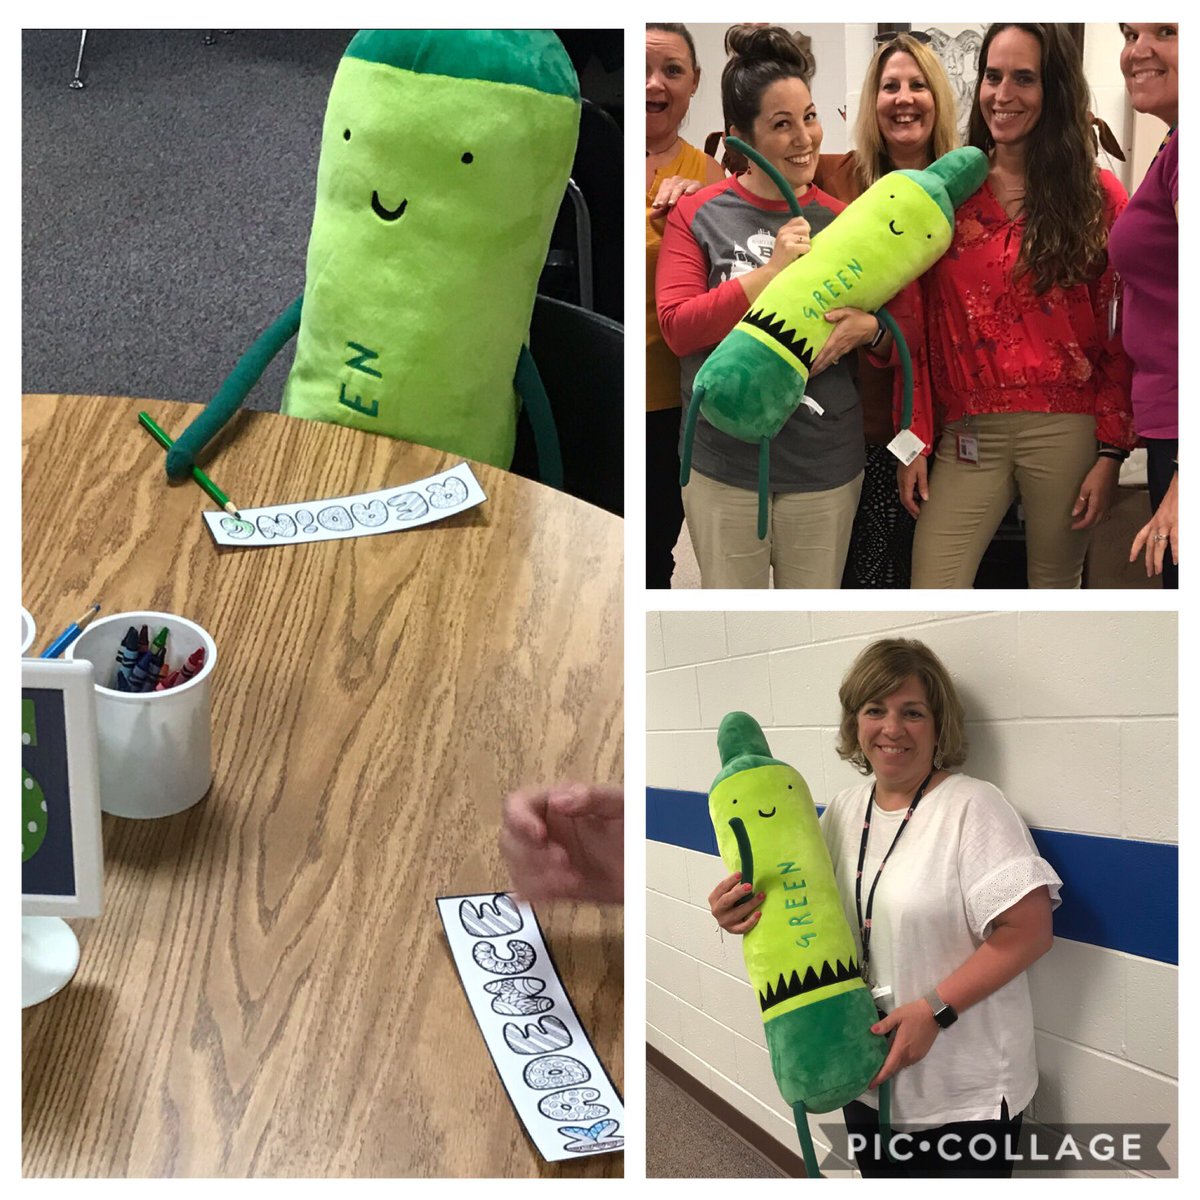 Kelley Green enjoyed his first day at Oak Elementary! He received a warm welcome from Mrs. Beach and the office ladies. He also joined a 3rd grade class for library. #thedaythecrayonwenttoschool #librarylife #oakheroes @BartlettSchools